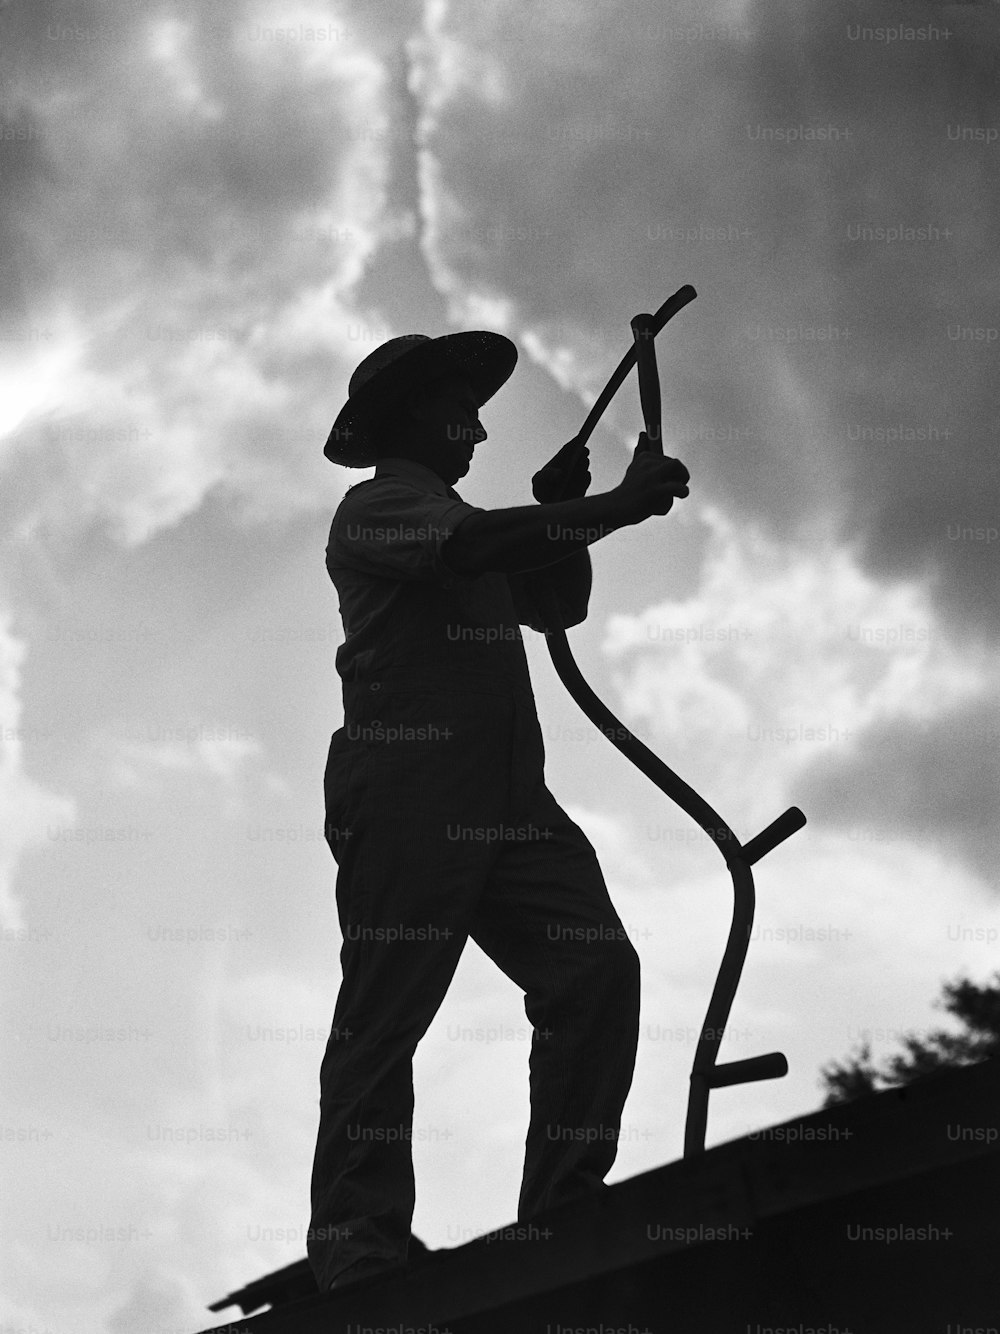 UNITED STATES - CIRCA 1930s:  Silhouette of farmer in straw hat, holding sickle.